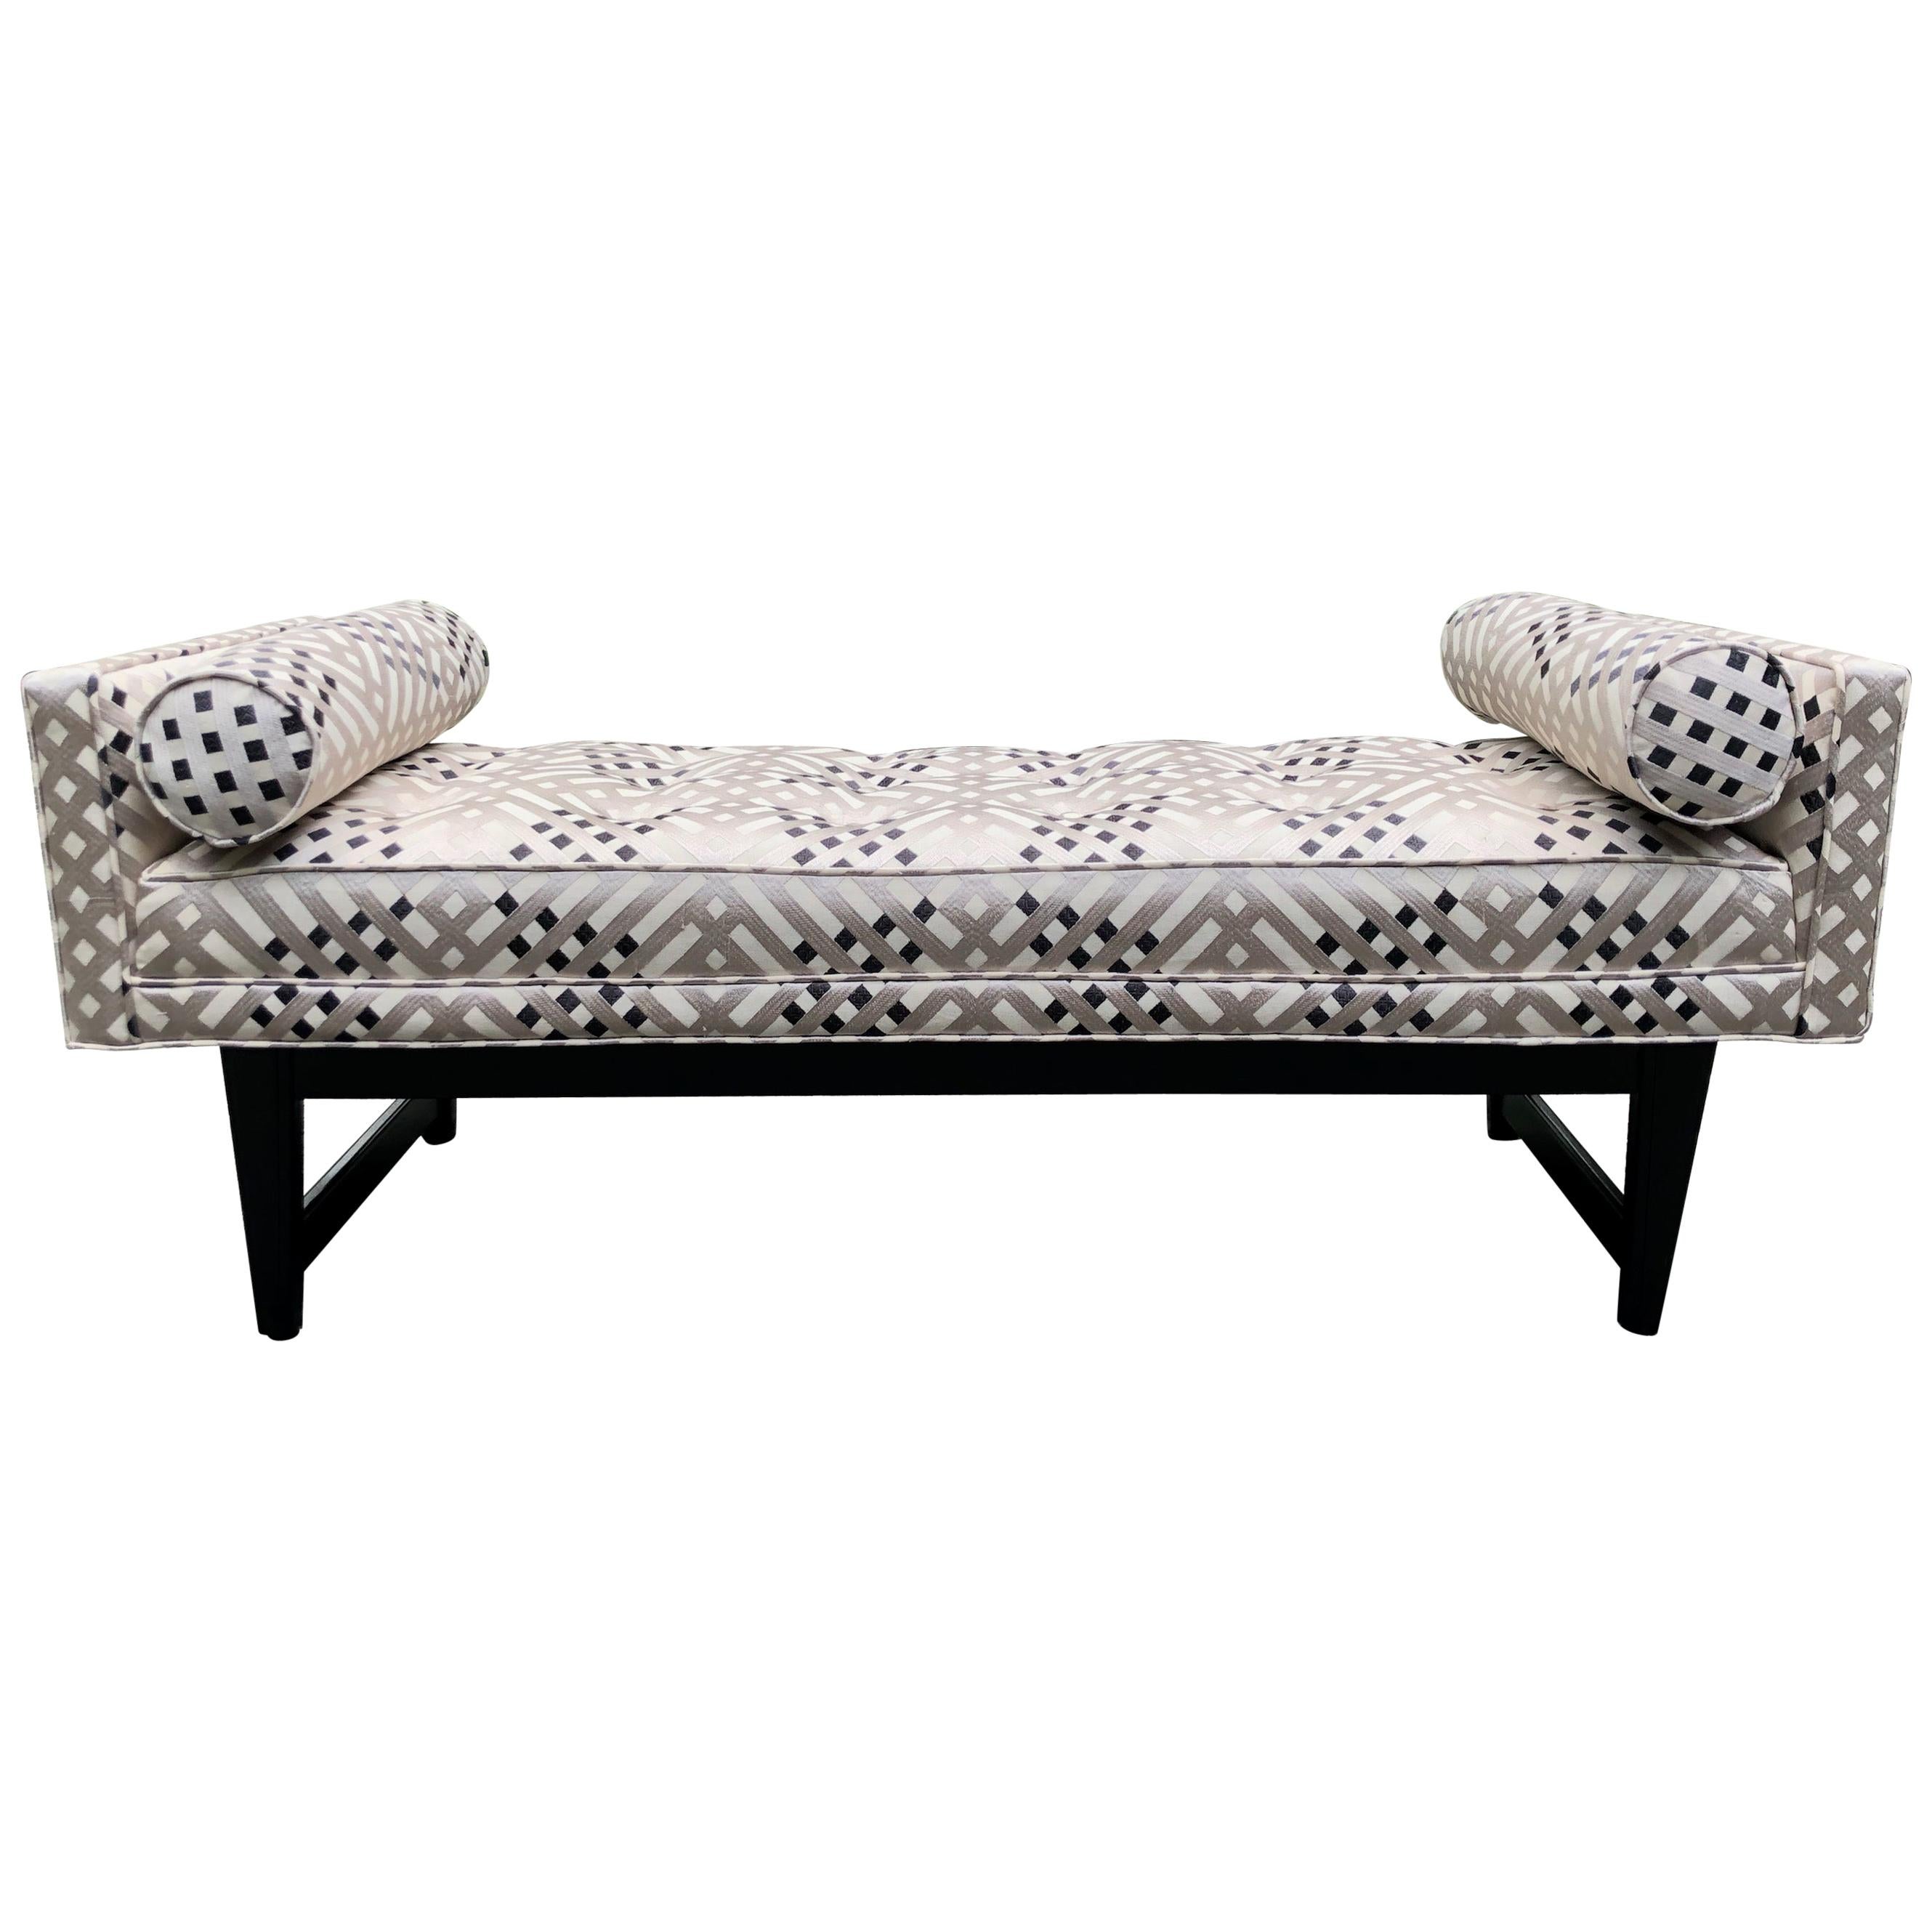 Classy Mid-Century Modern Settee Bench with Contemporary Lattice Upholstery